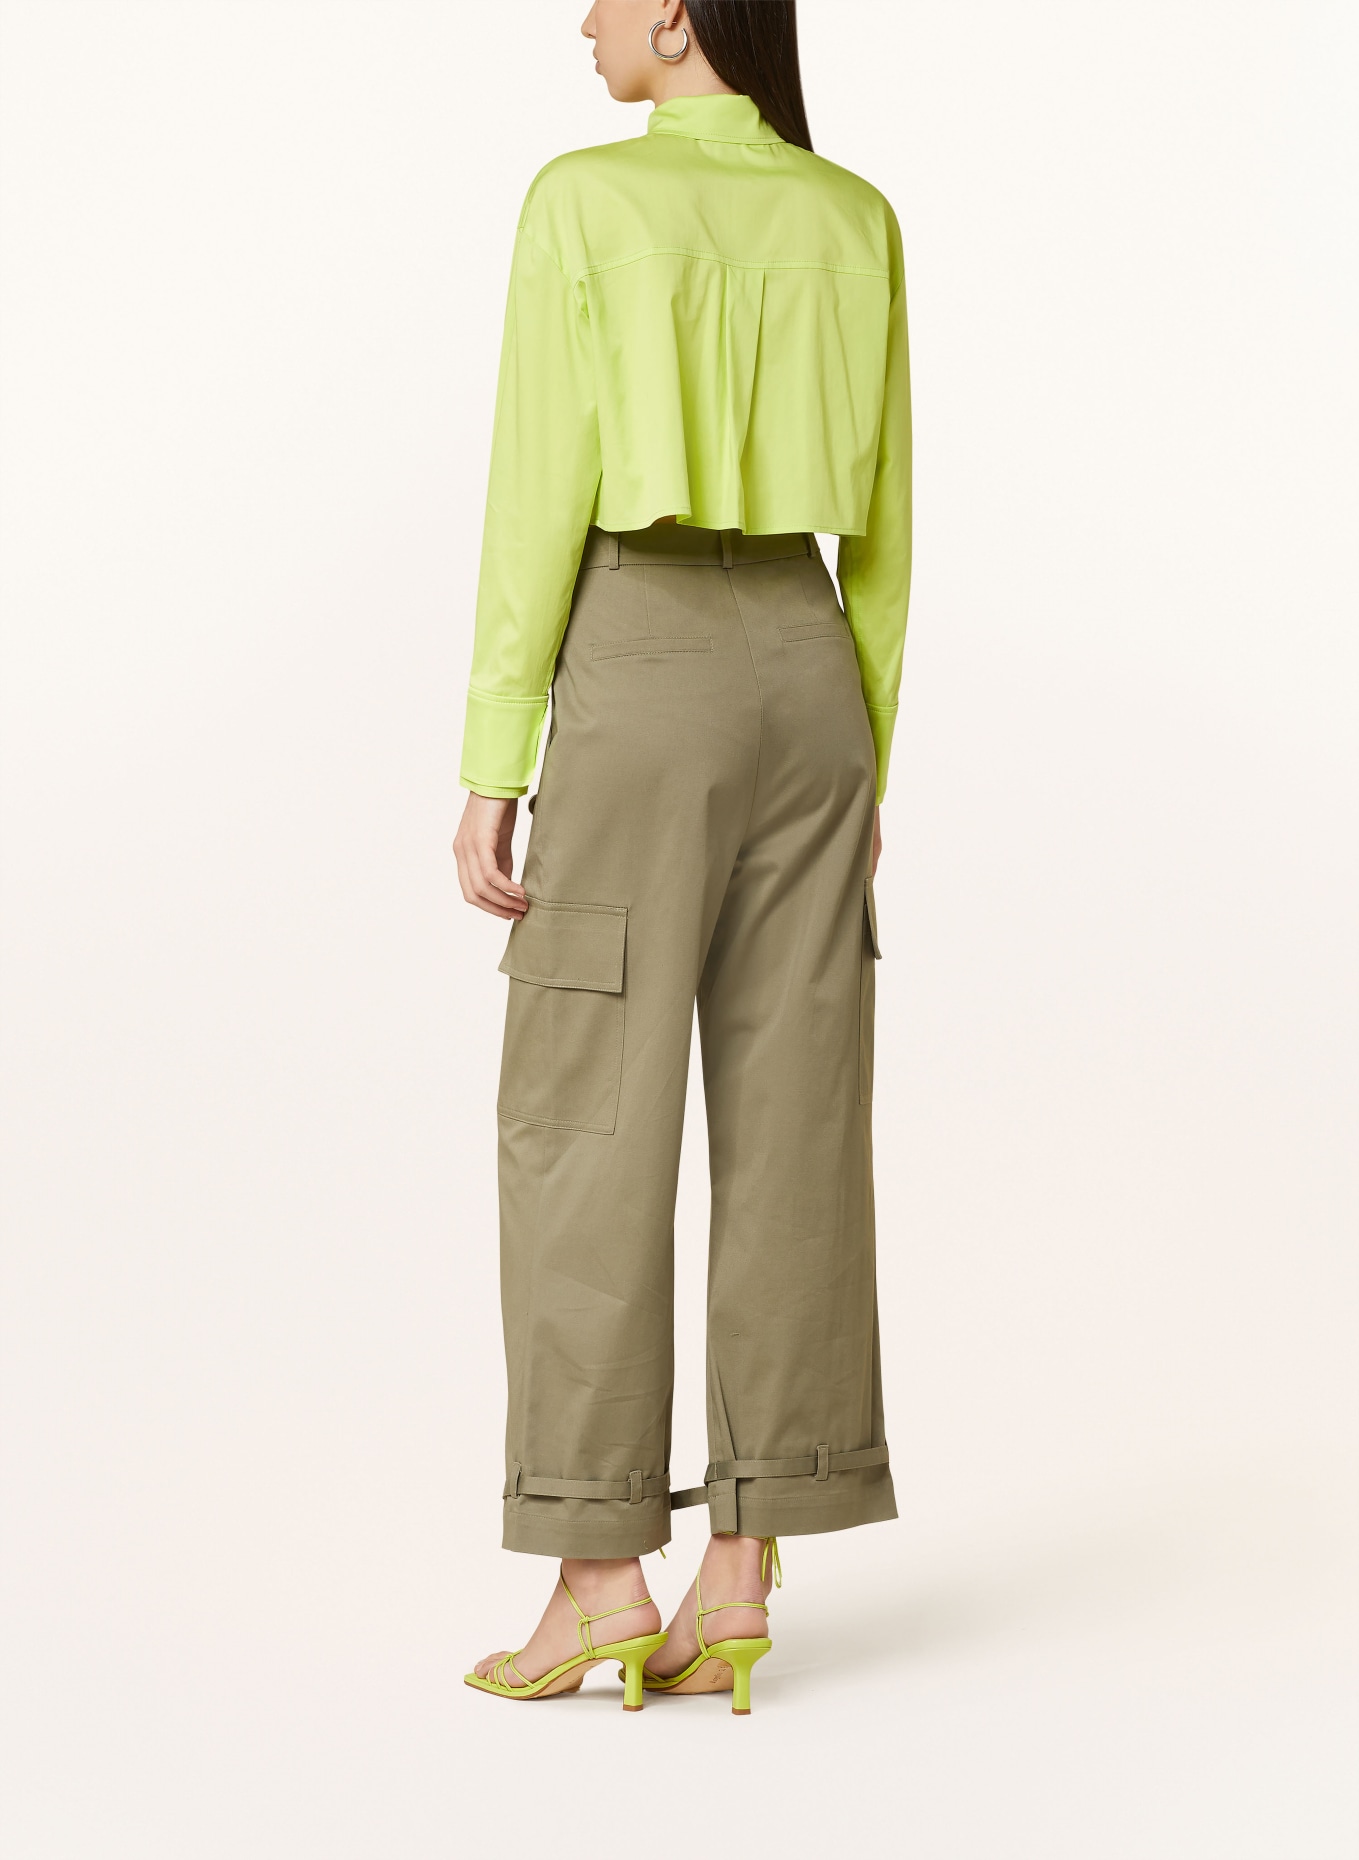 OH APRIL Cropped-Hemdbluse ARIA, Farbe: LIME LIME (Bild 3)